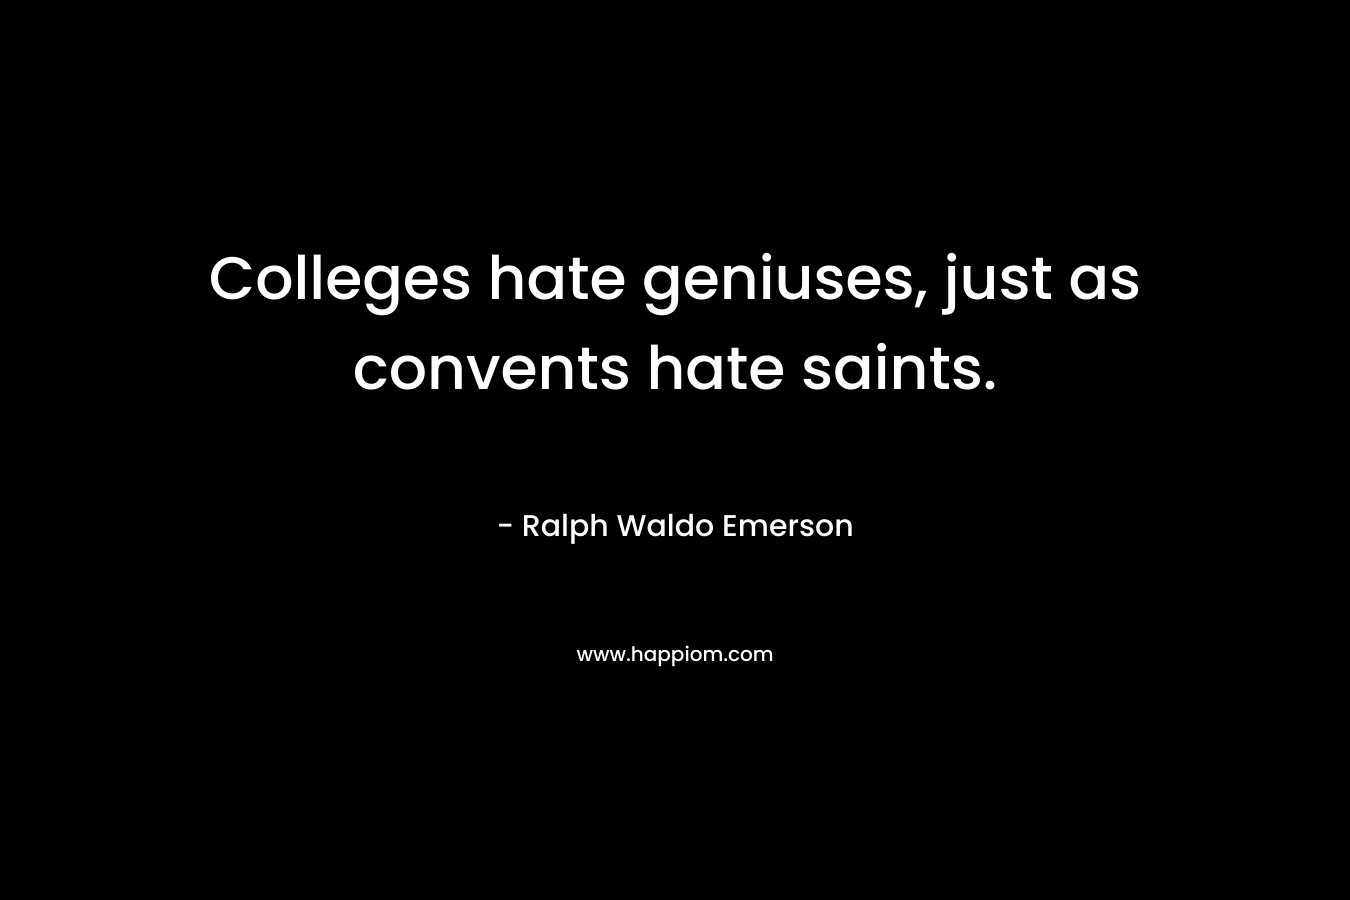 Colleges hate geniuses, just as convents hate saints. – Ralph Waldo Emerson